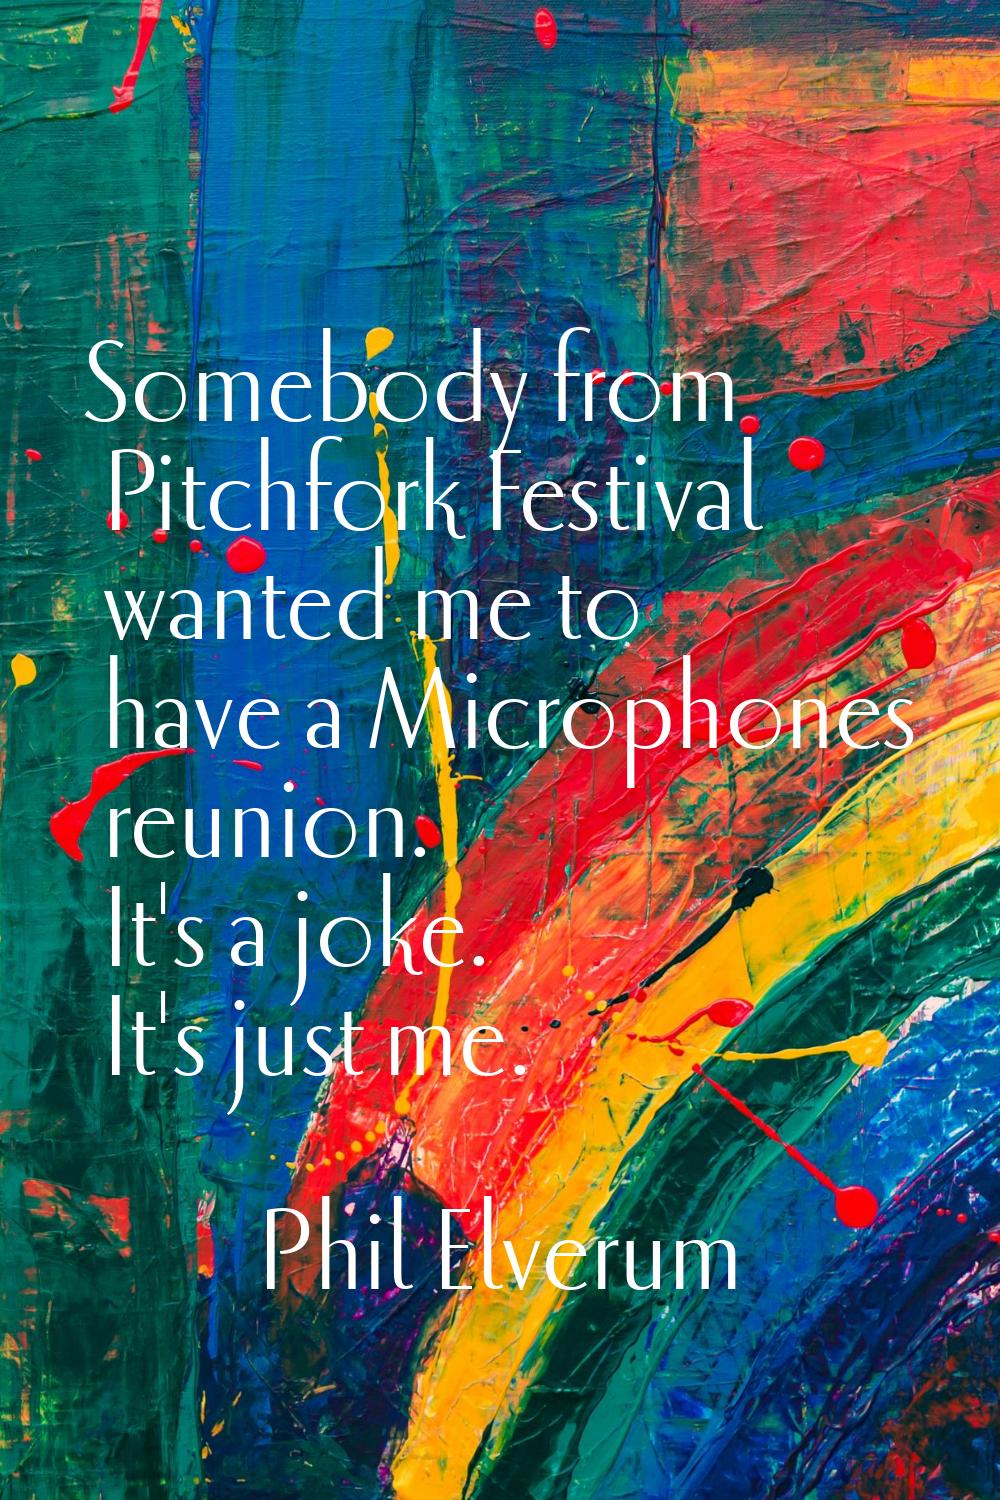 Somebody from Pitchfork Festival wanted me to have a Microphones reunion. It's a joke. It's just me